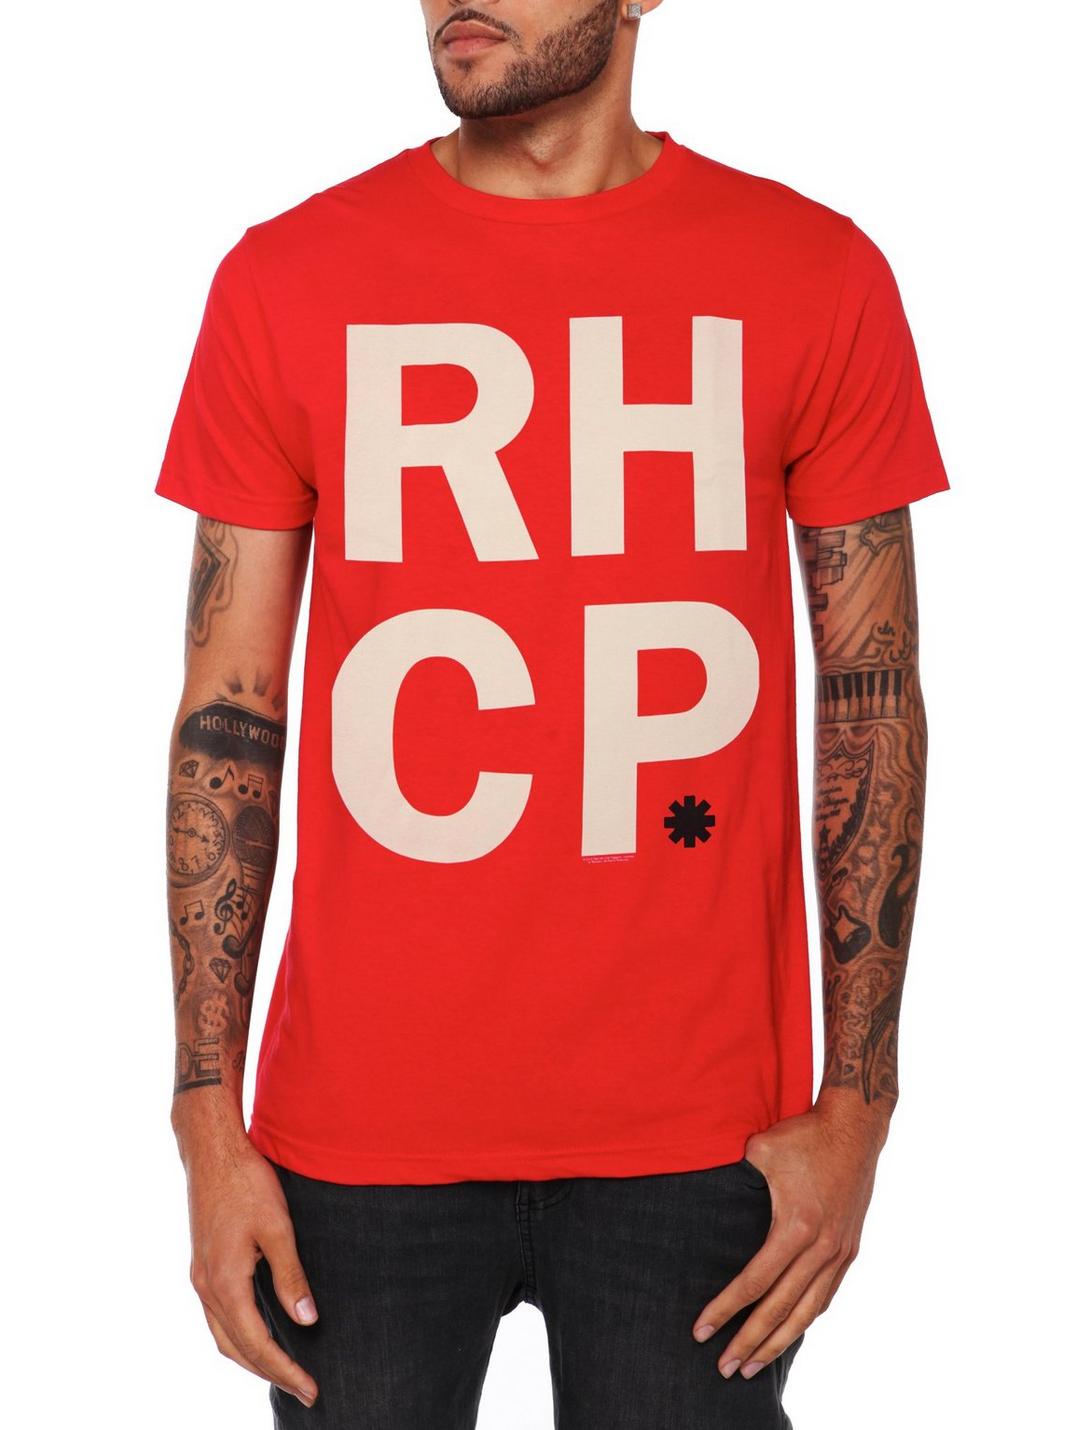 Red Hot Chili Peppers RHCP T-Shirt, BLACK, hi-res